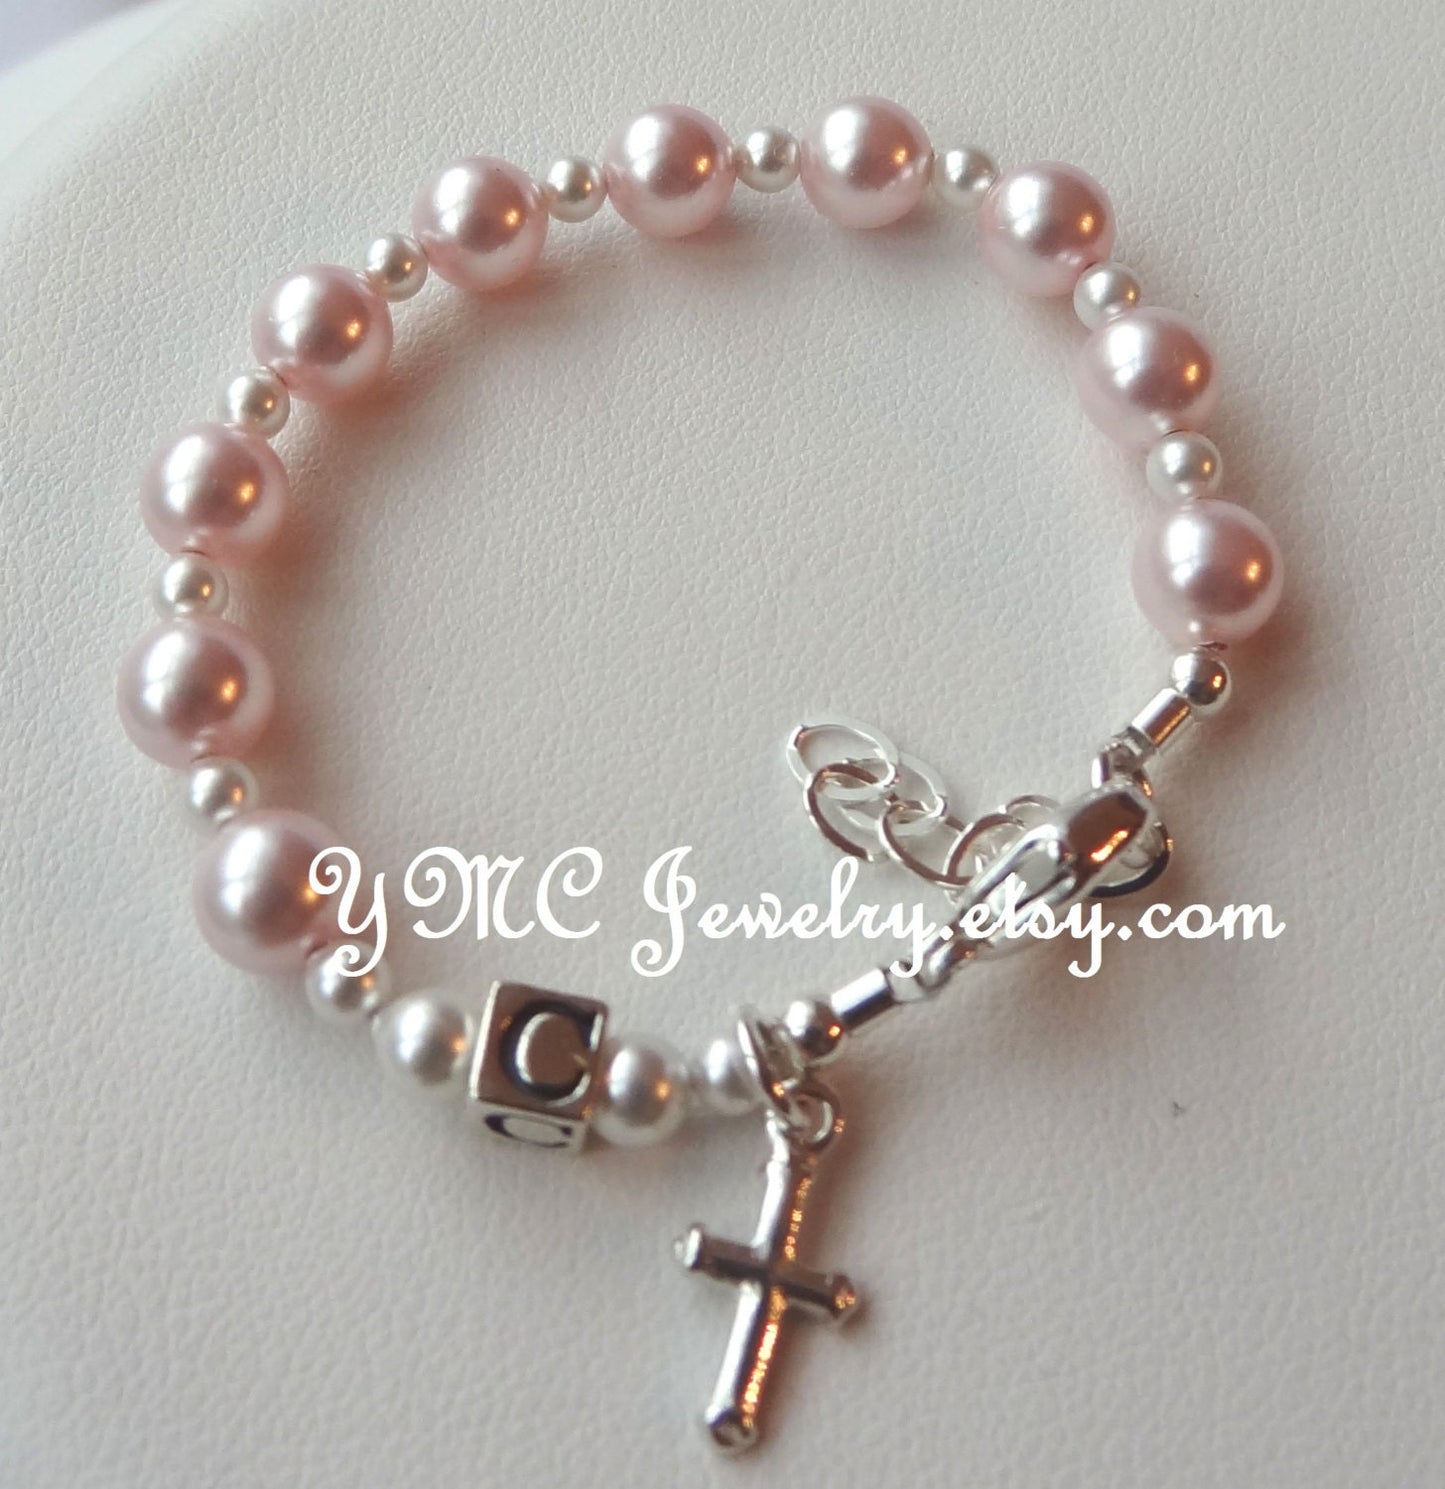 Pearl Pink Baby Rosary Bracelet,First Communion Bracelet,Baptism Rosary Bracelet,Pink Pearl Chaplet Bracelet,Pink Pearl Initial Bracelet